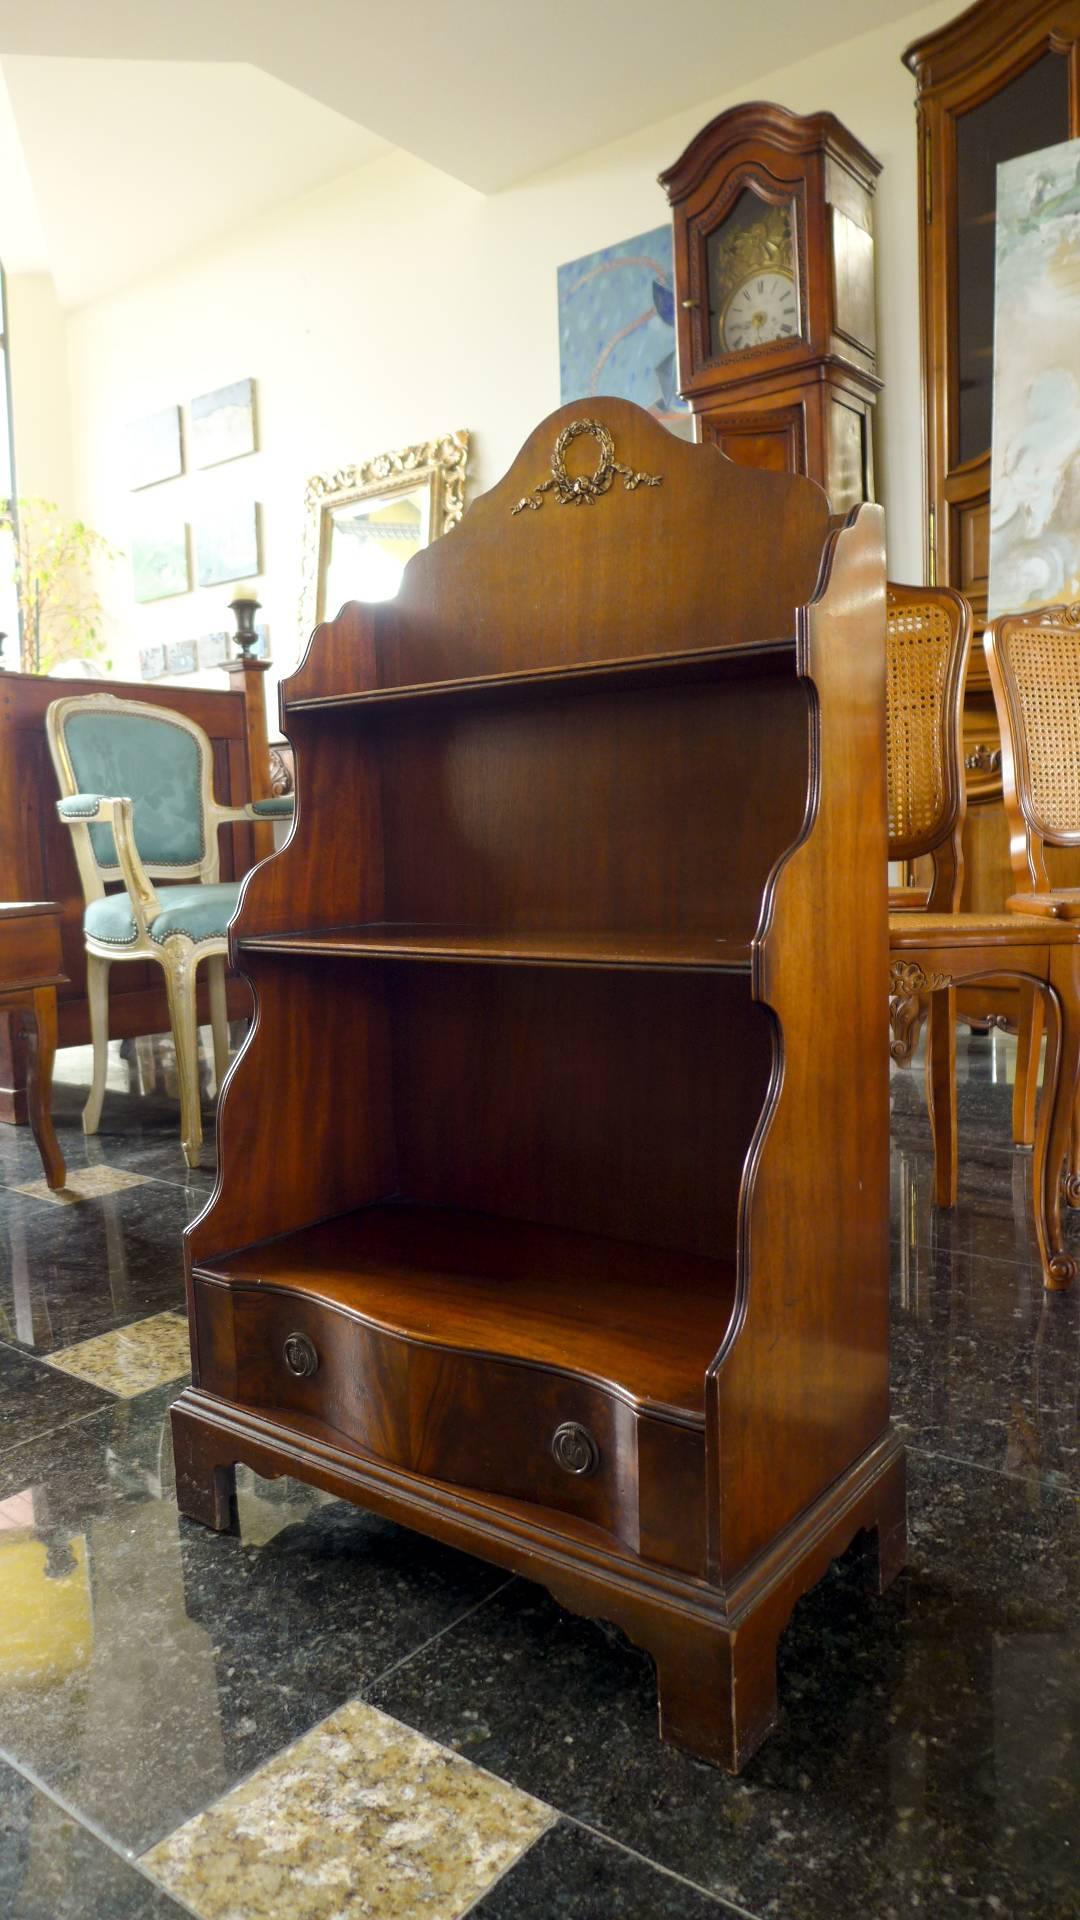 An early 19th century Regency period mahogany waterfall bookcase, having shaped sides and three open shelves with a large drawer beneath.
England, circa 1820.